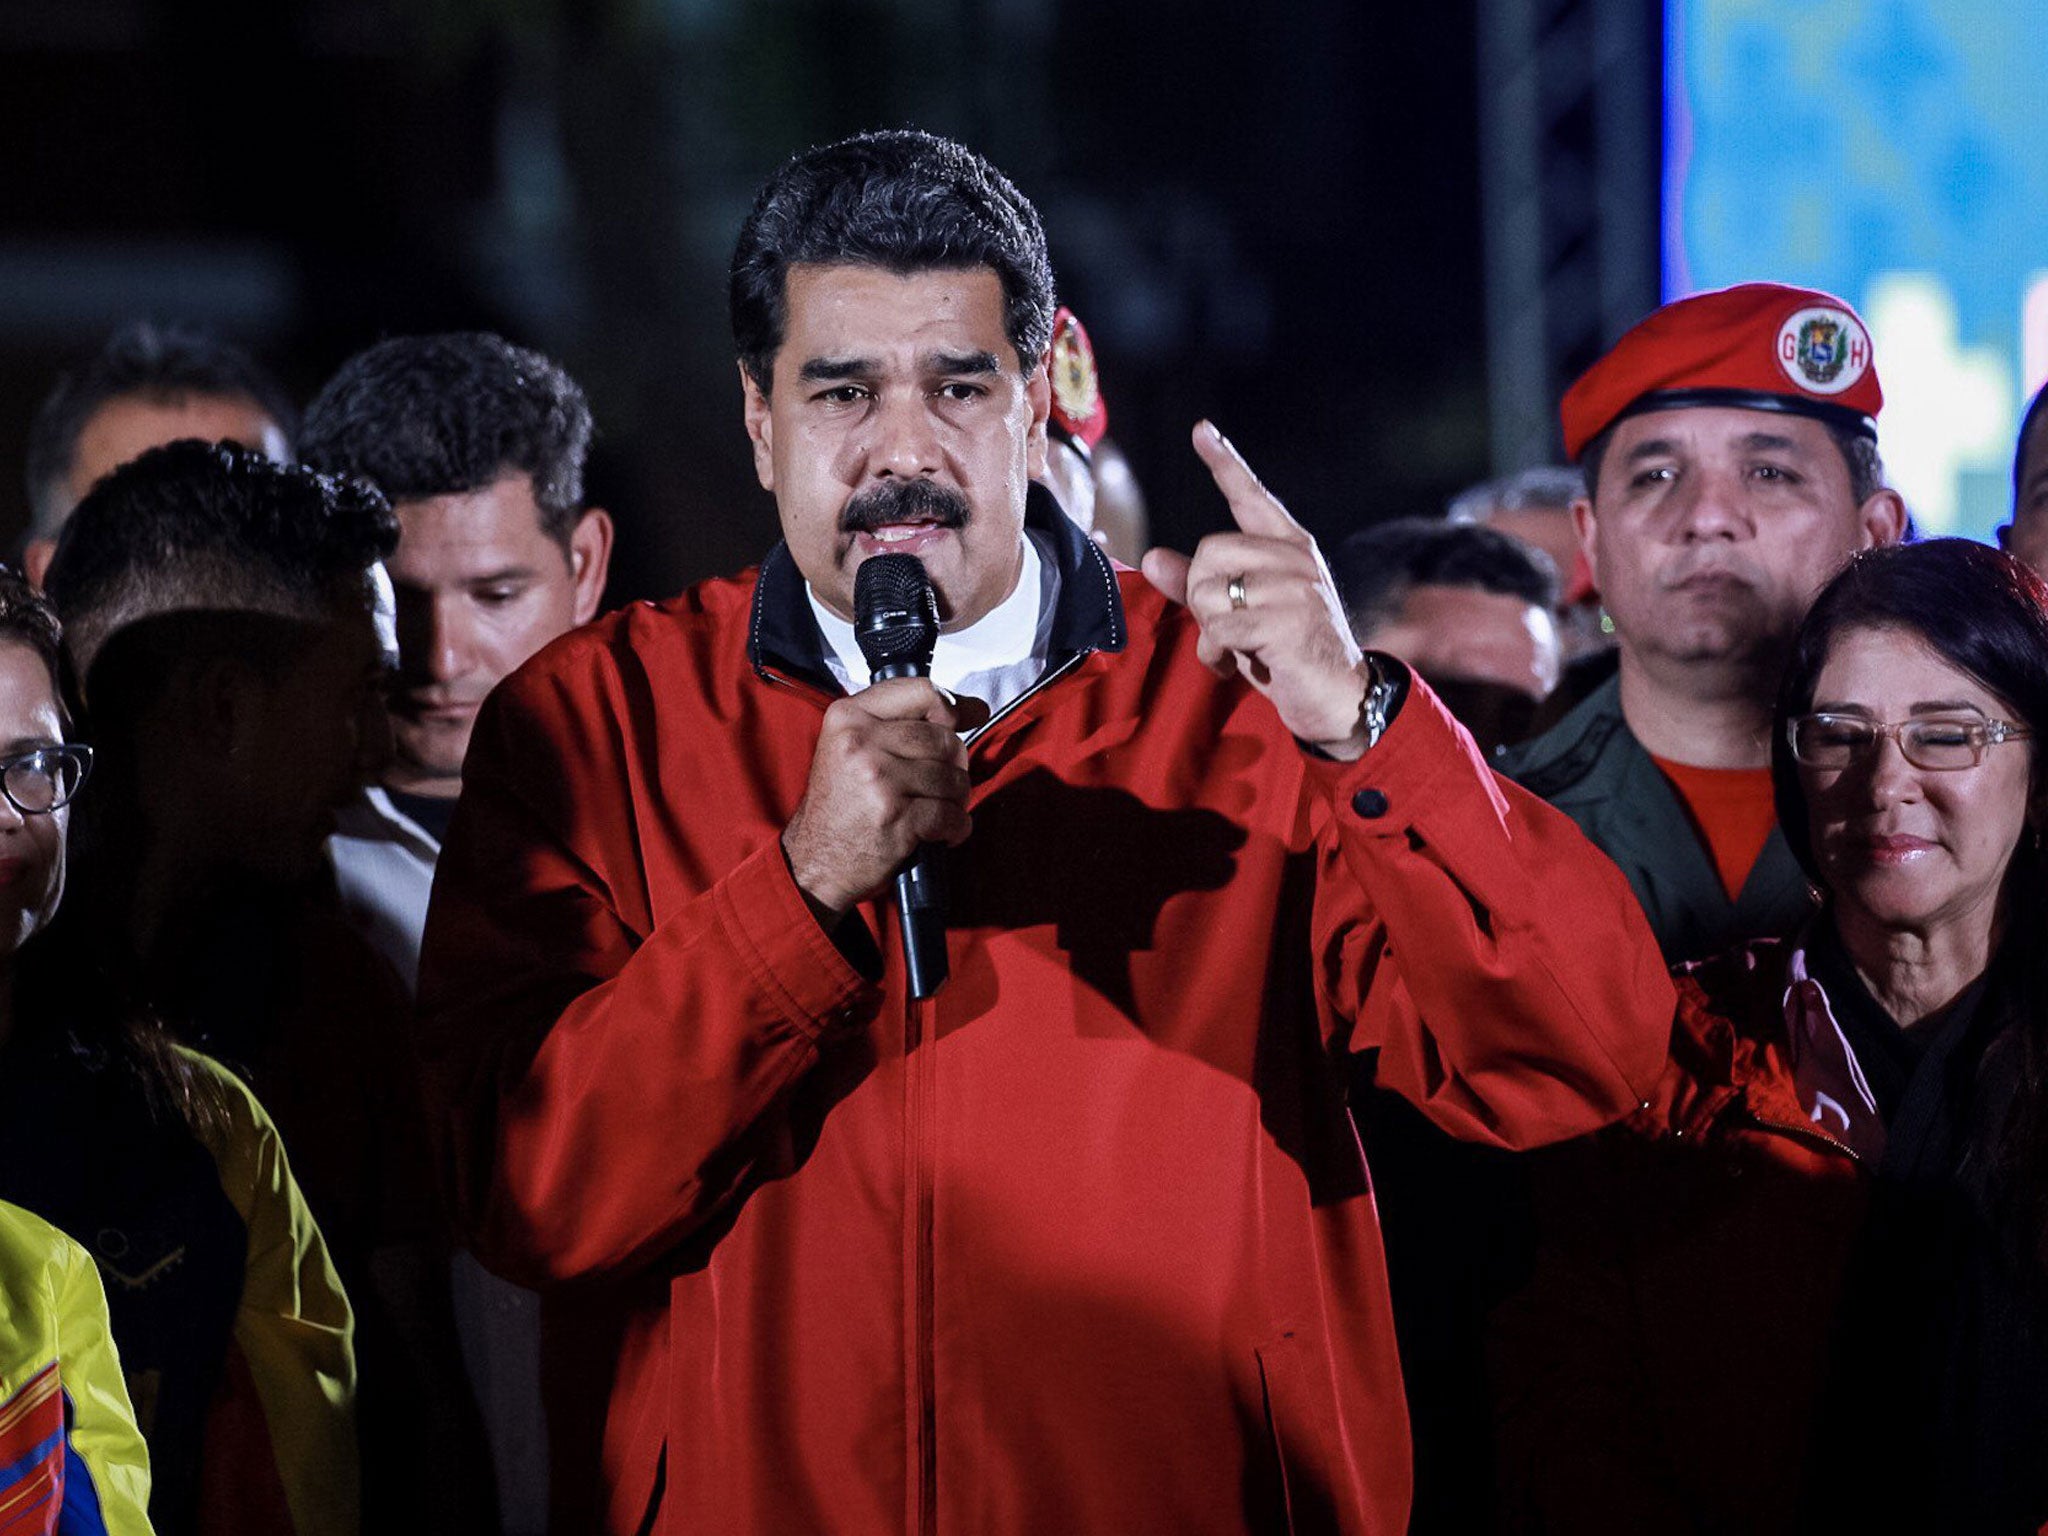 Venezuelan President Nicolas Maduro celebrates election results after a national vote on his proposed Constituent Assembly